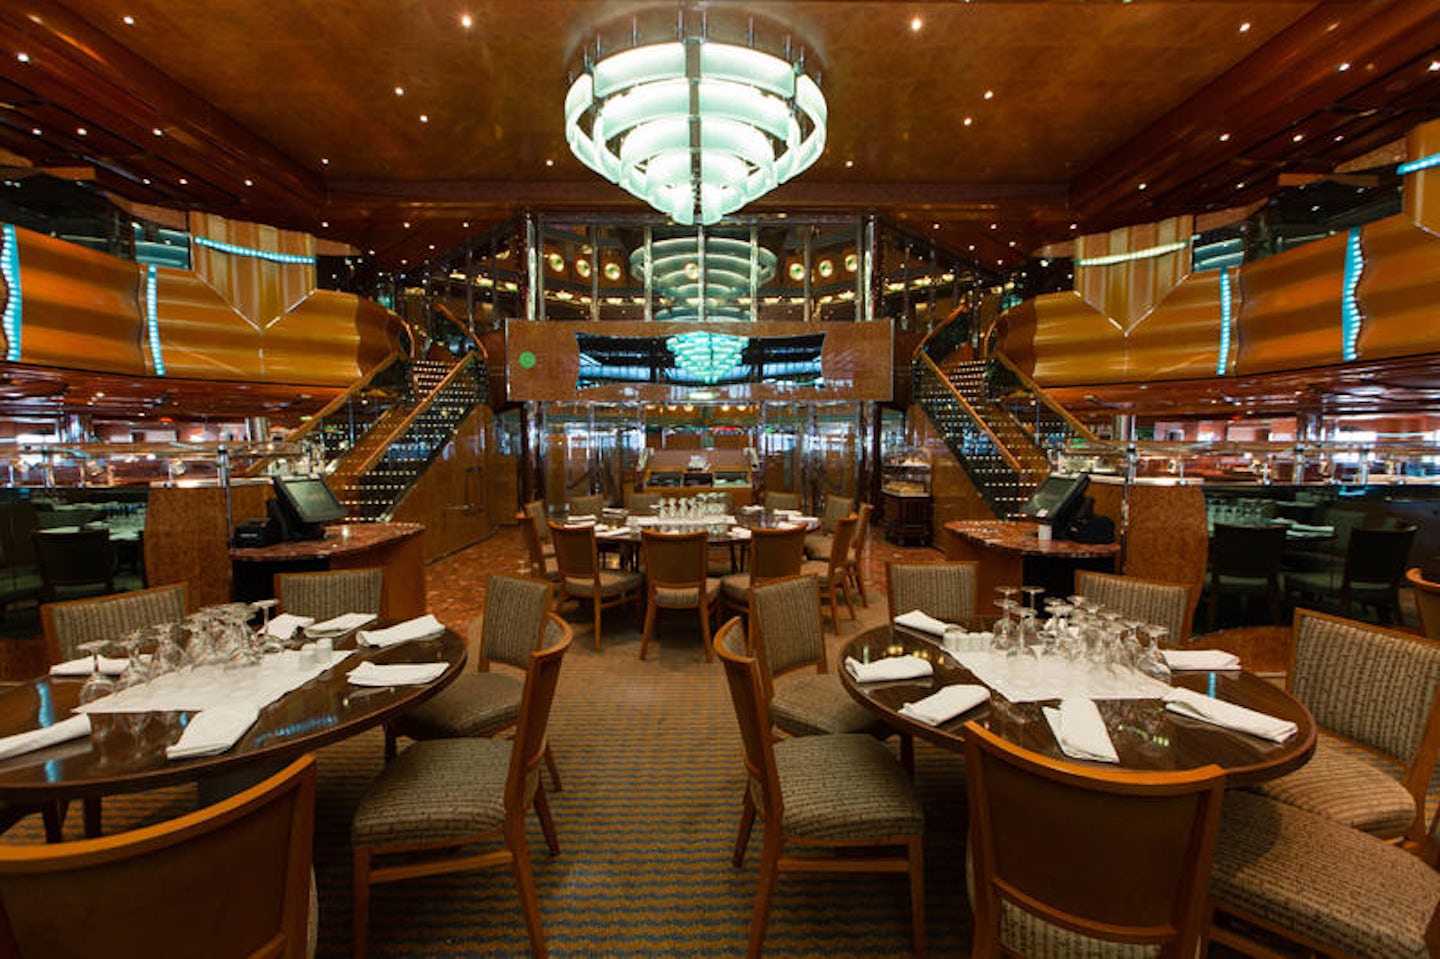 Southern Lights Dining Room on Carnival Magic